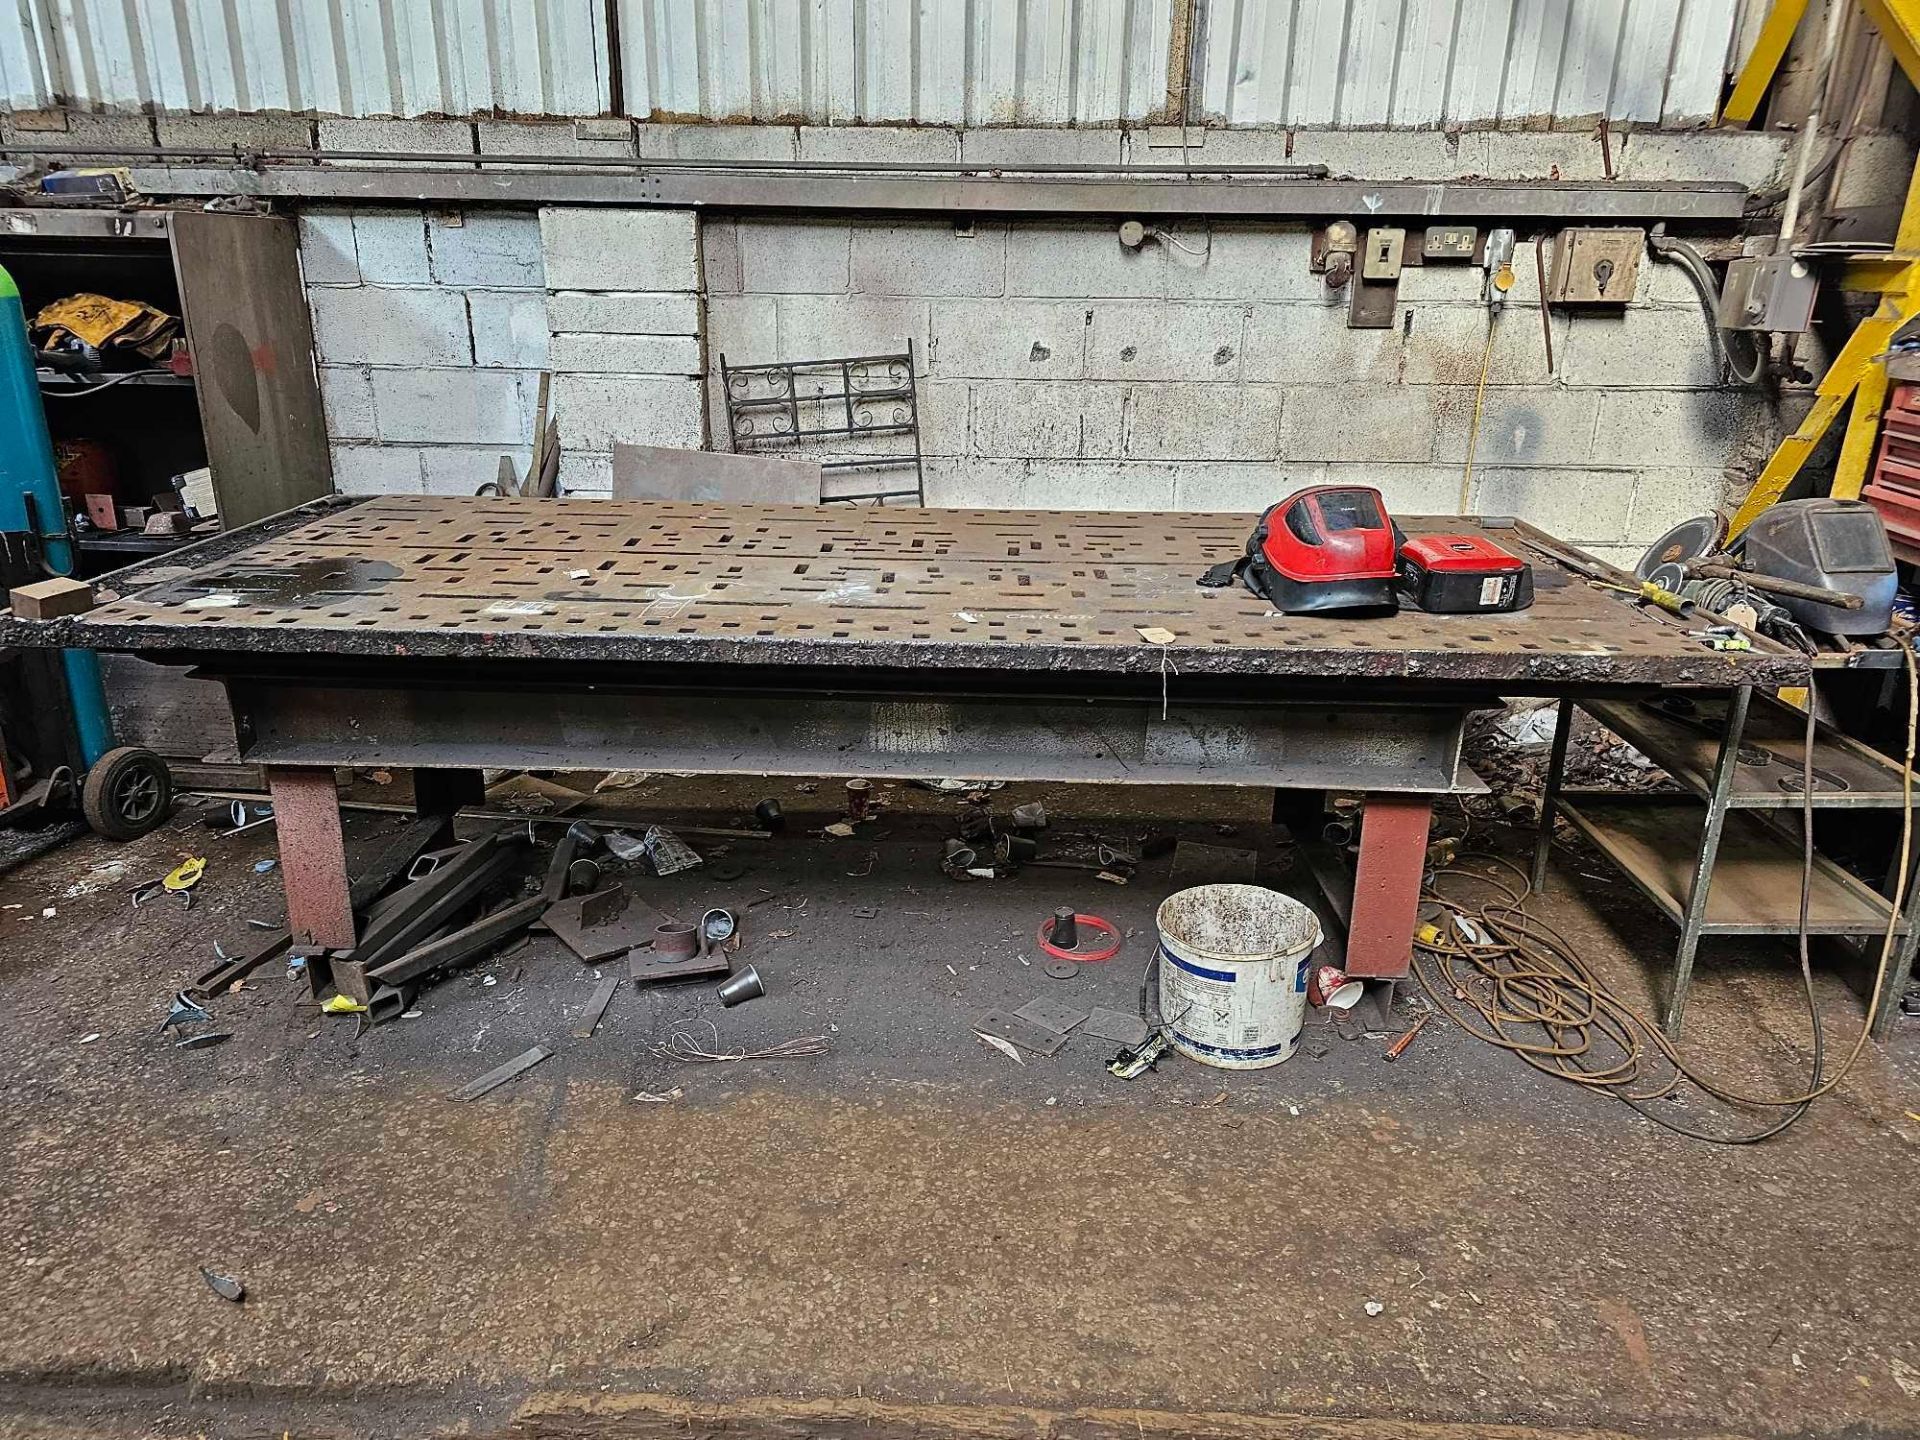 Cast Steel Engineers Marking Out Work Bench 310 x 128 x 91cm Weight 2000kg - Image 4 of 4